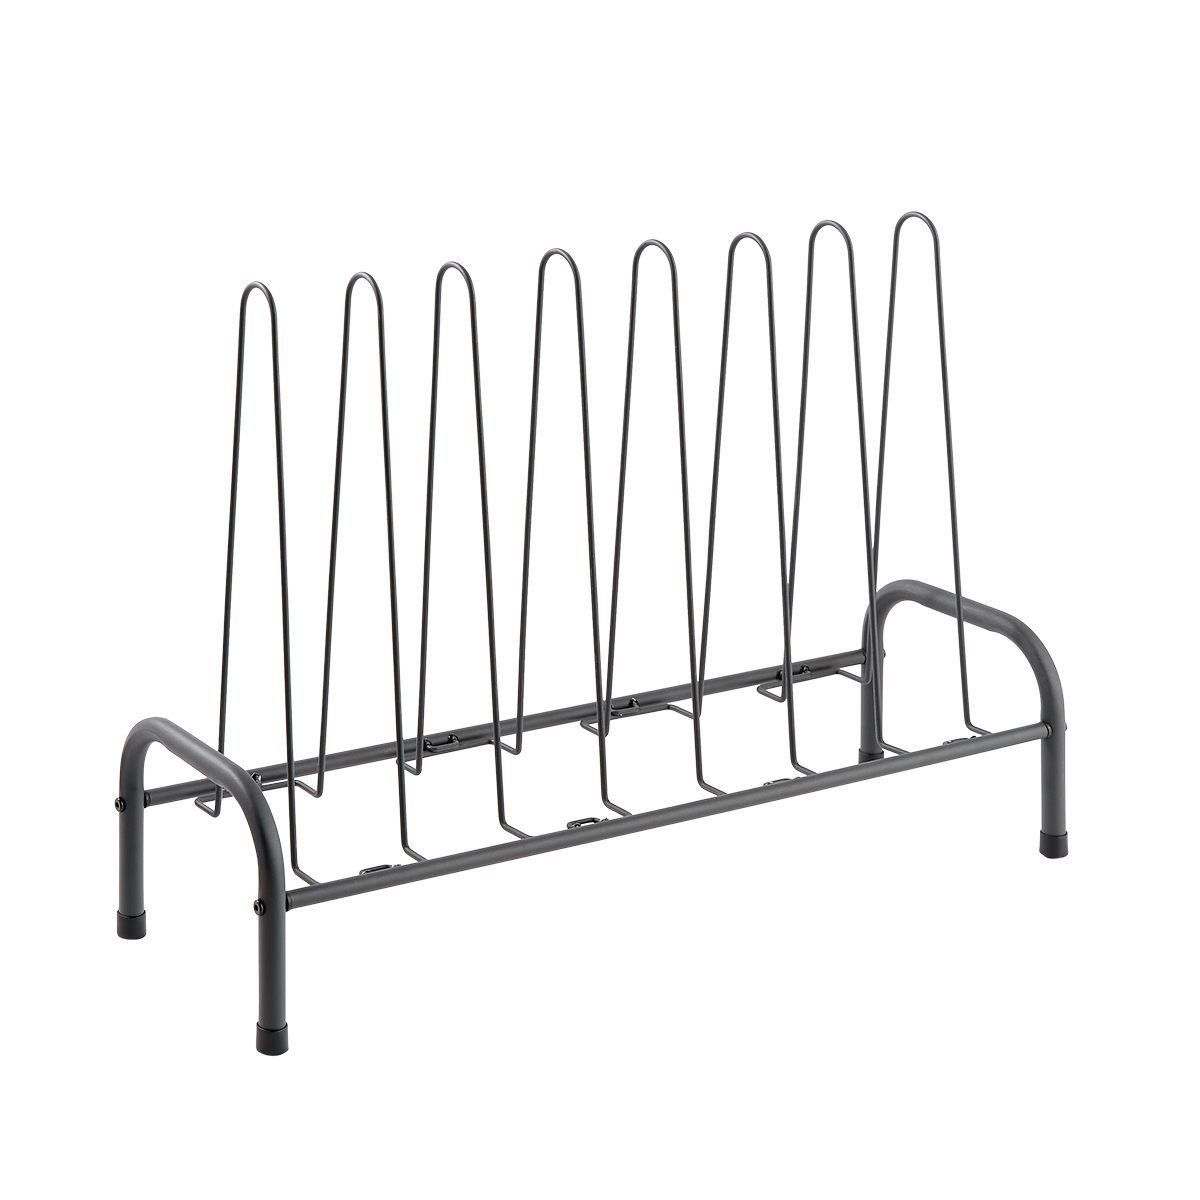 https://www.containerstore.com/catalogimages/398271/10080937-graphite-4-pair-boot-topper.jpg